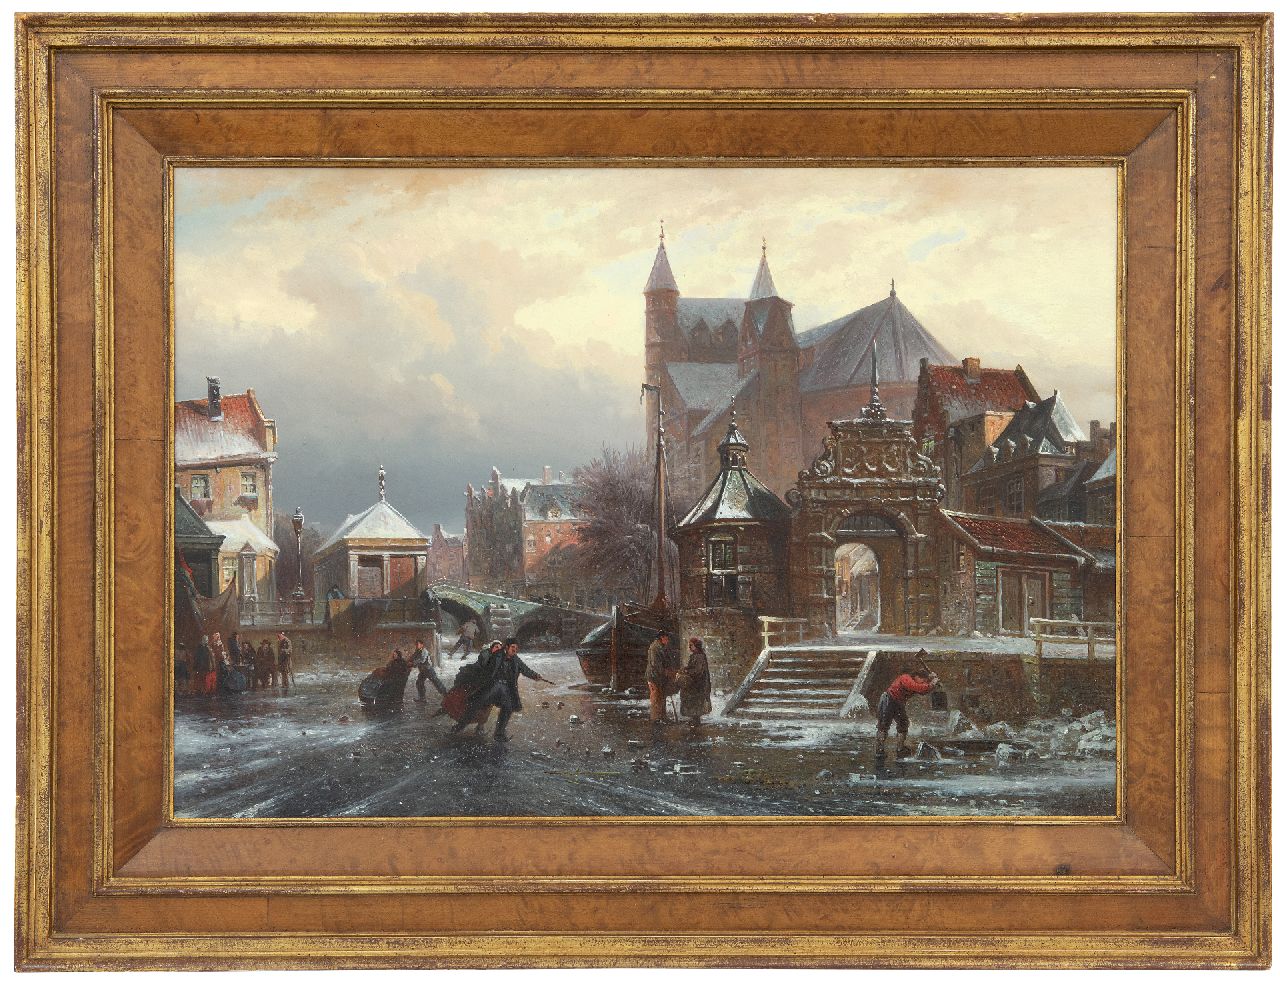 Bommel E.P. van | Elias Pieter van Bommel | Paintings offered for sale | Skating fun on a frozen canal in a town, oil on panel 36.7 x 54.4 cm, signed l.r. and dated '72, without frame